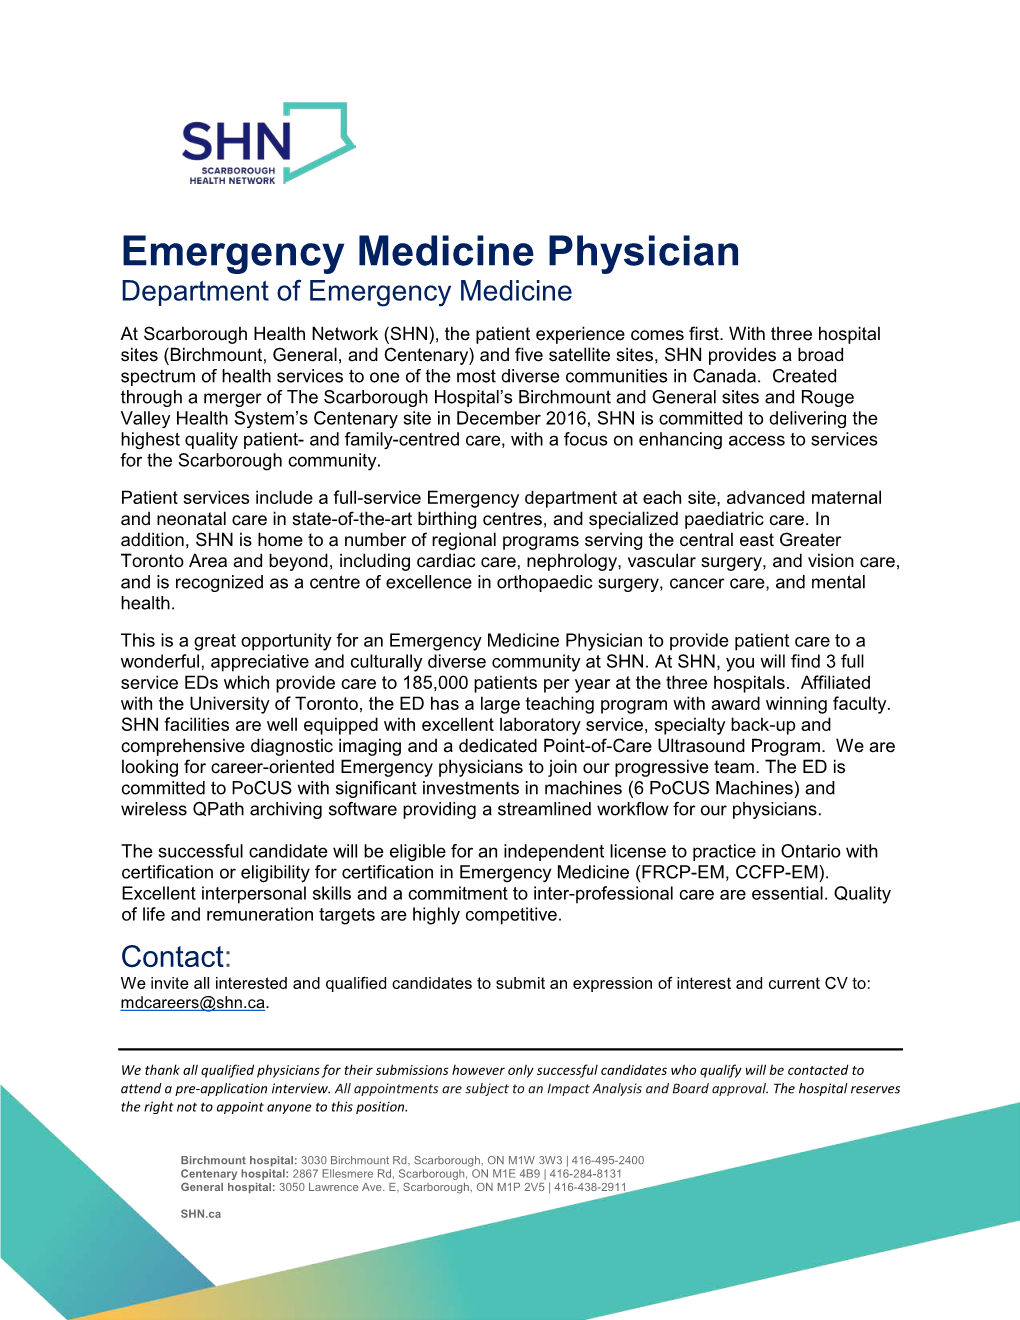 Emergency Medicine Physician Department of Emergency Medicine at Scarborough Health Network (SHN), the Patient Experience Comes First